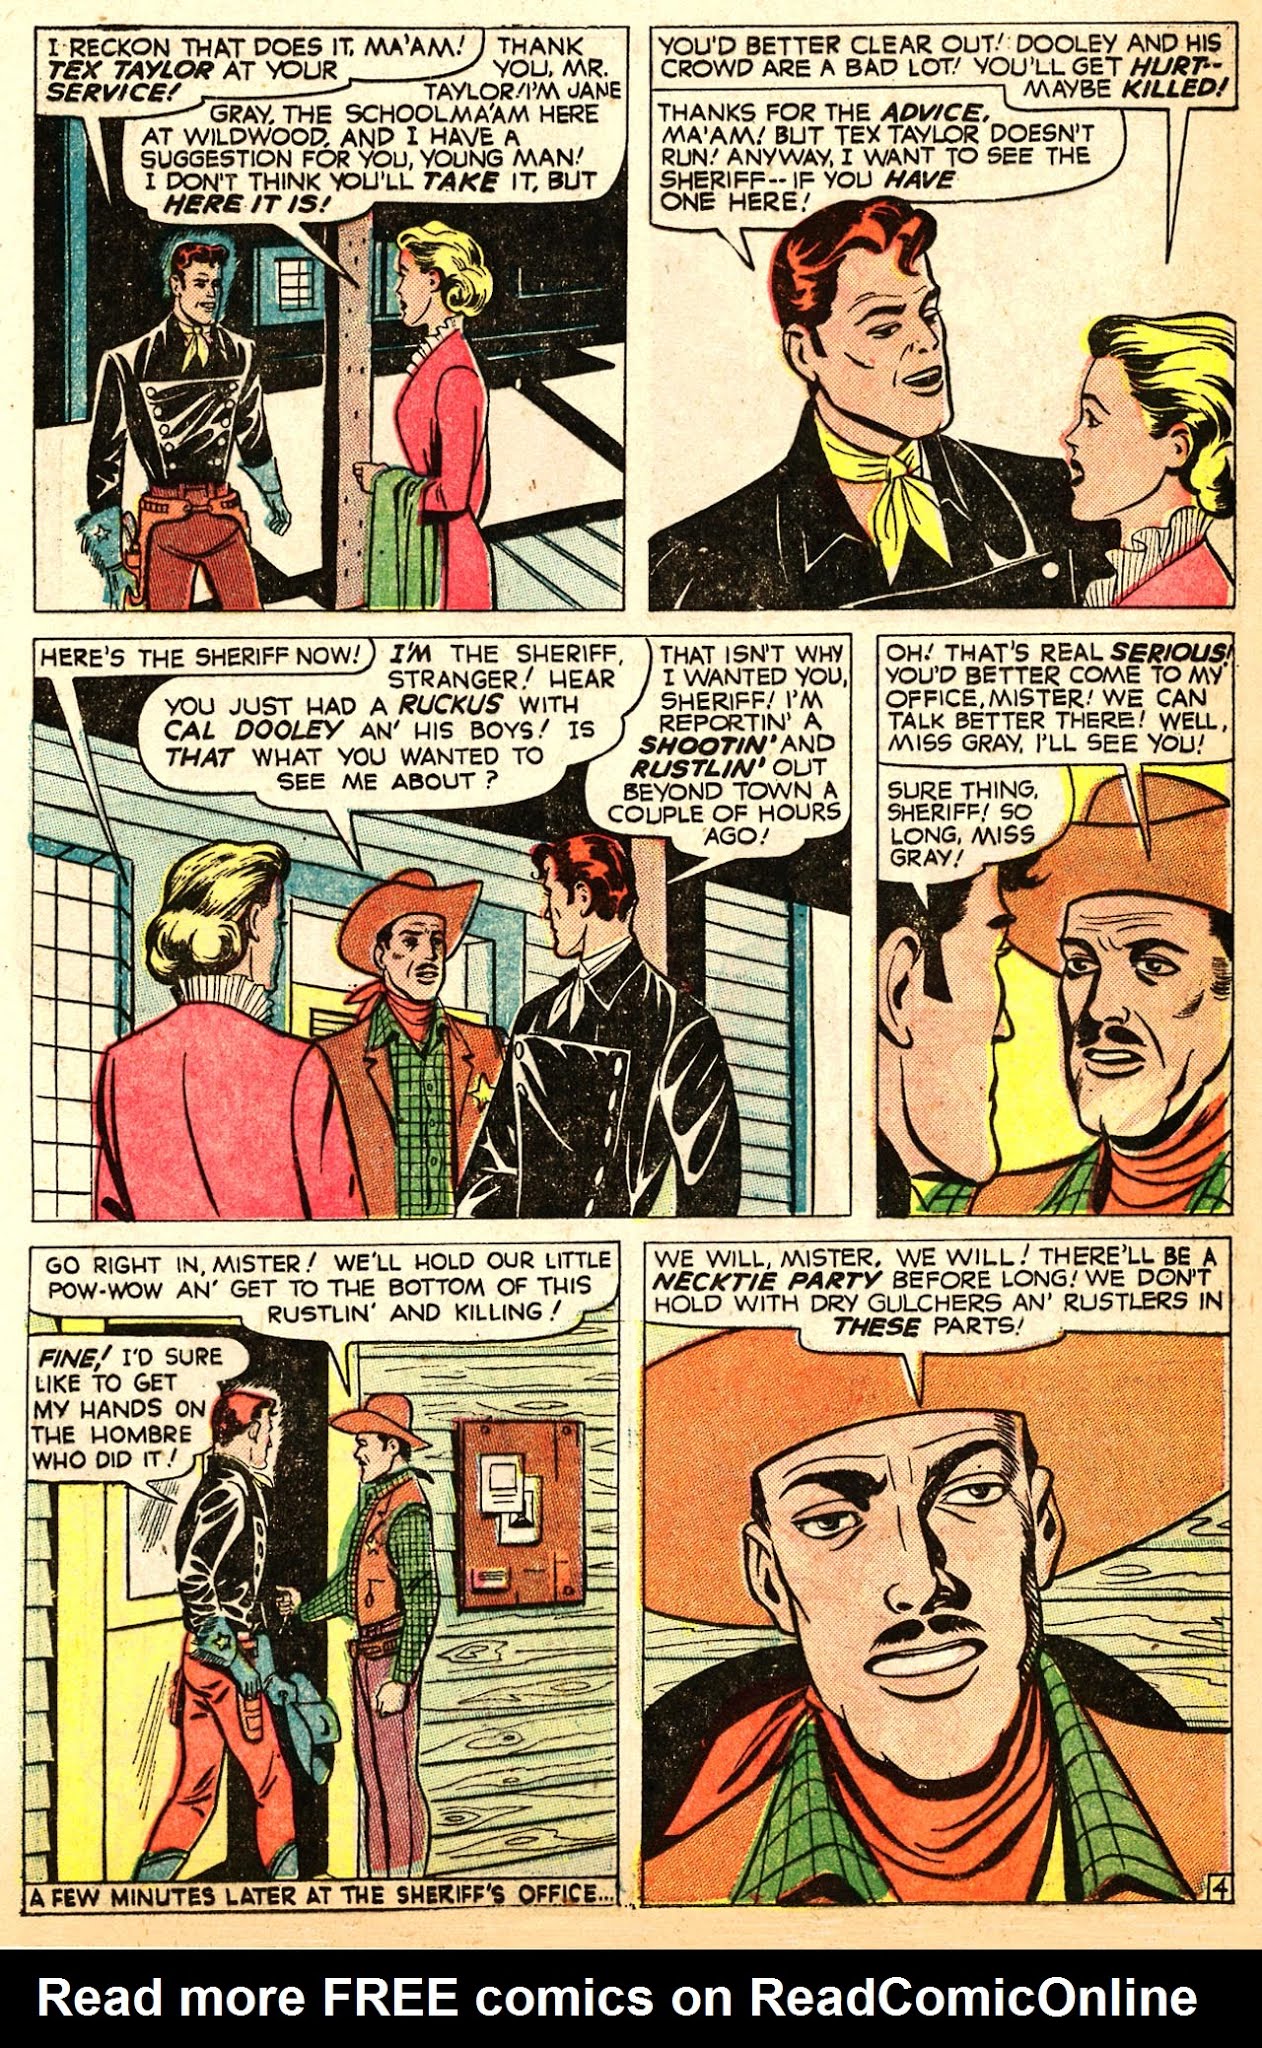 Read online Tex Taylor comic -  Issue #3 - 13